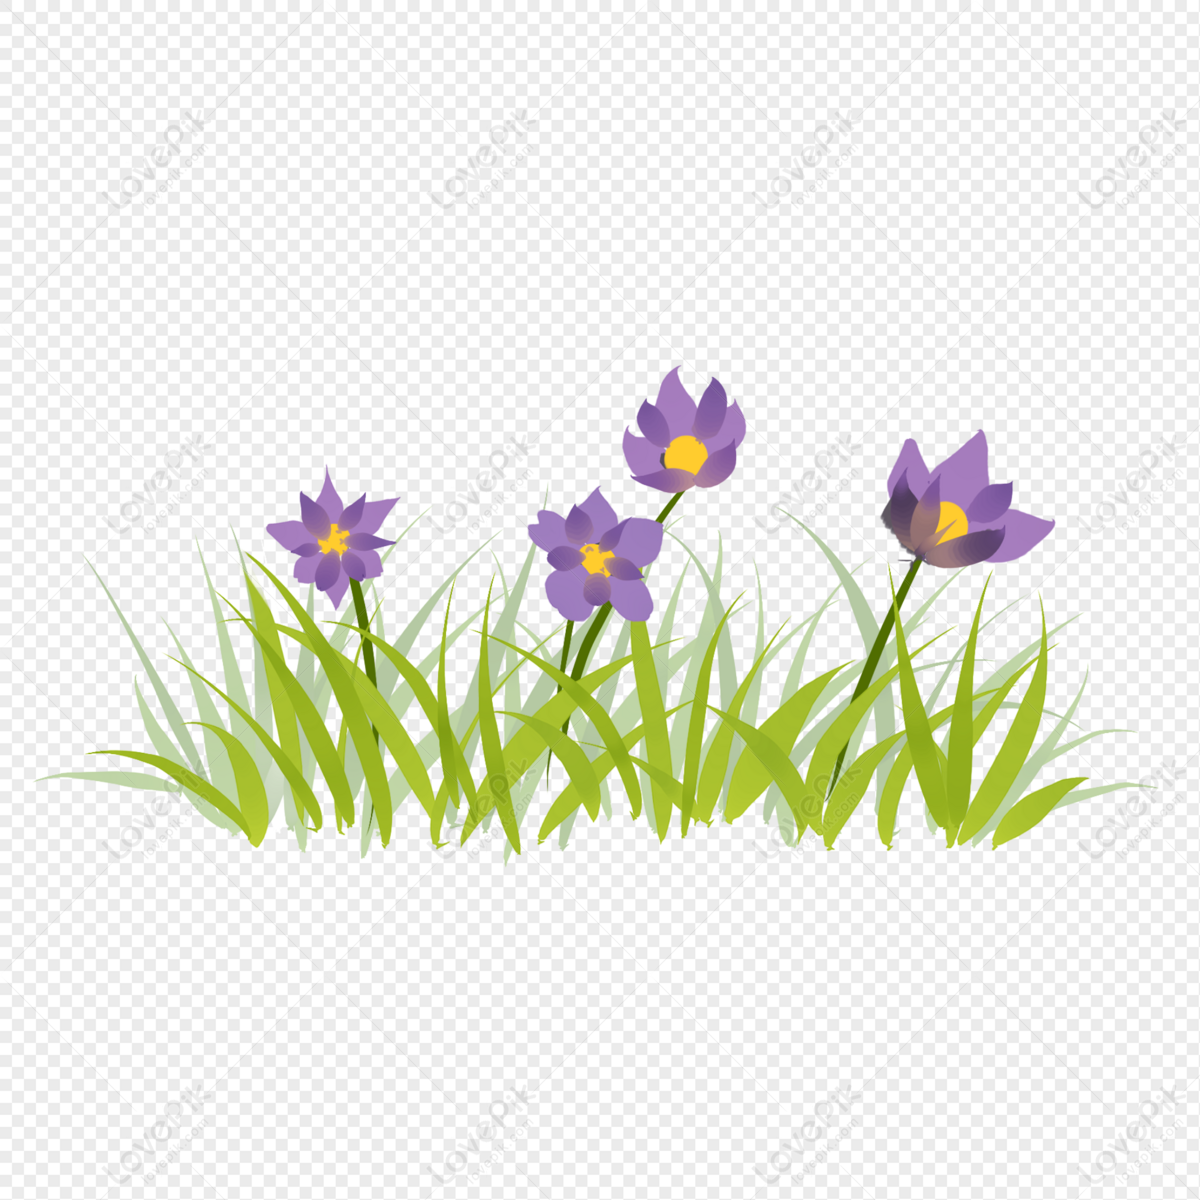 Cartoon Purple Flowers PNG Free Download And Clipart Image For Free  Download - Lovepik | 401569213